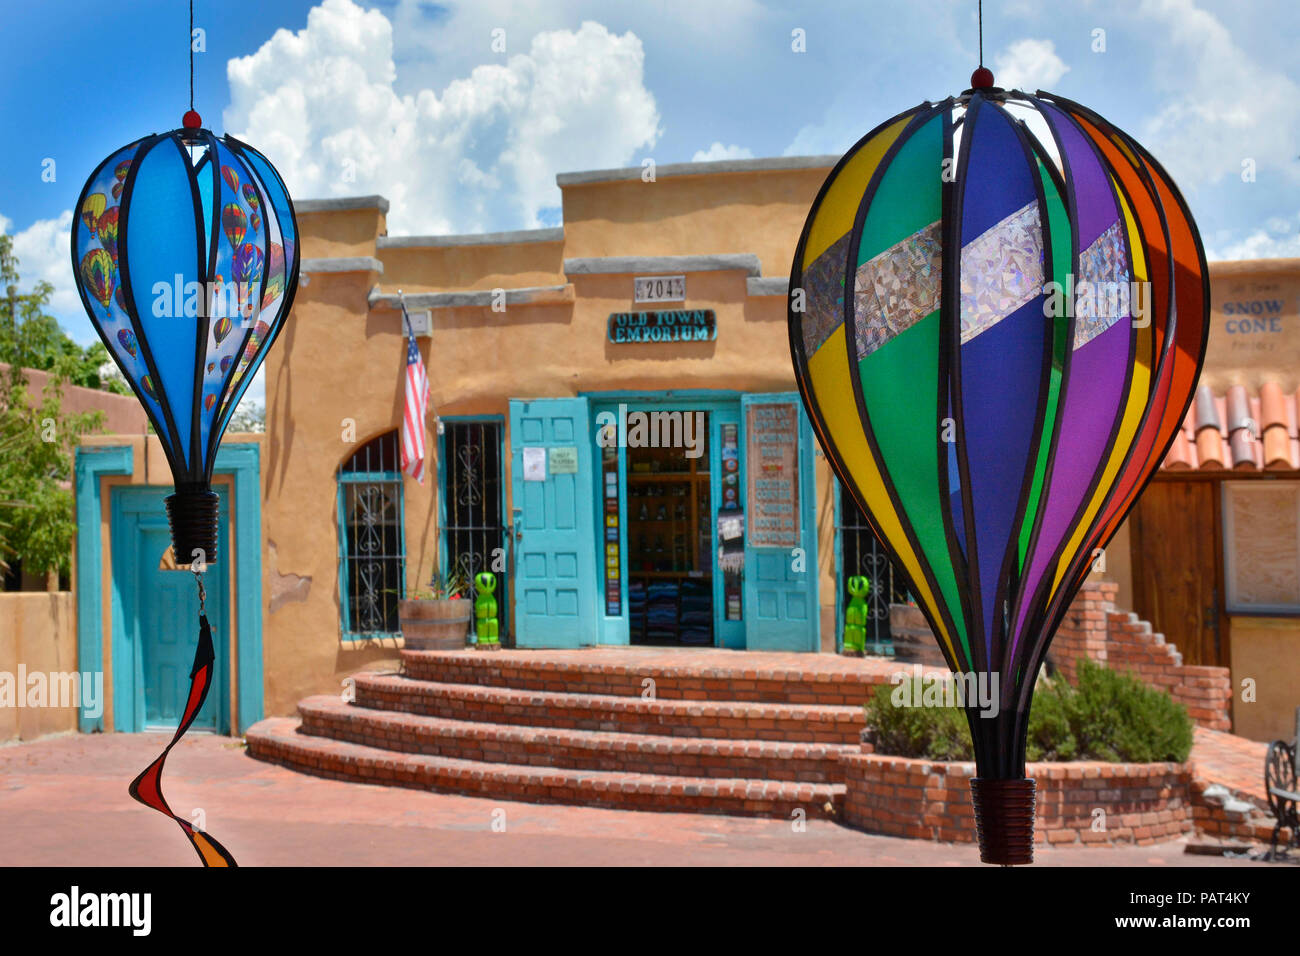 handcrafted paper  art of hot air balloons hang from under potico of shopping district in Old Town Albuquerque, NM across from Aobe Complex of shops a Stock Photo